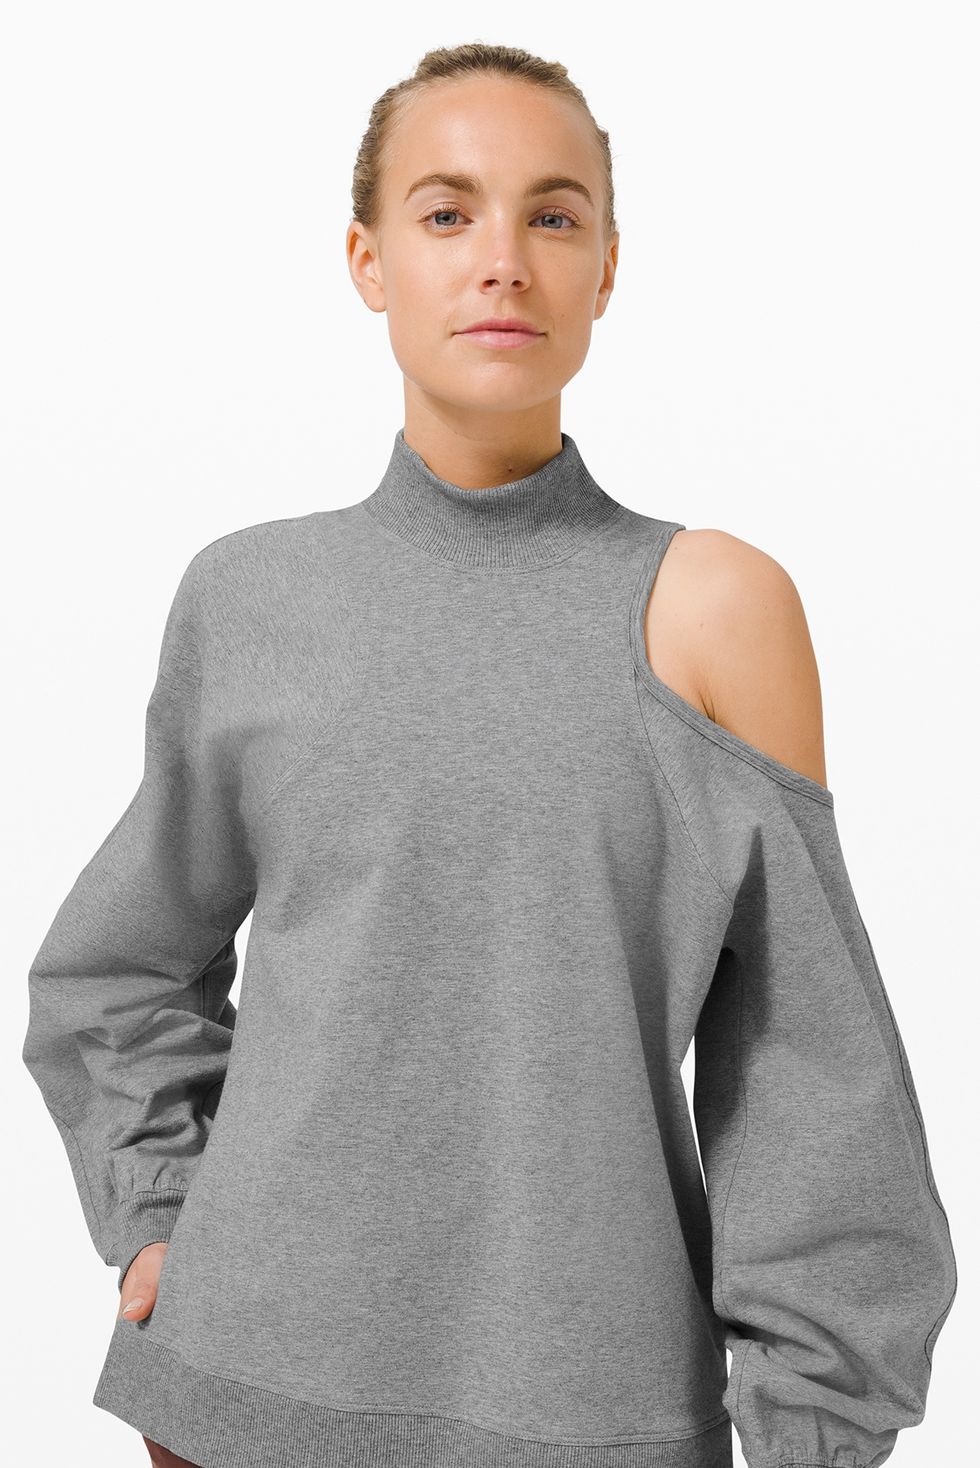 Lululemon Is Selling A Cold-Shoulder Sweater for Your COVID Vaccine